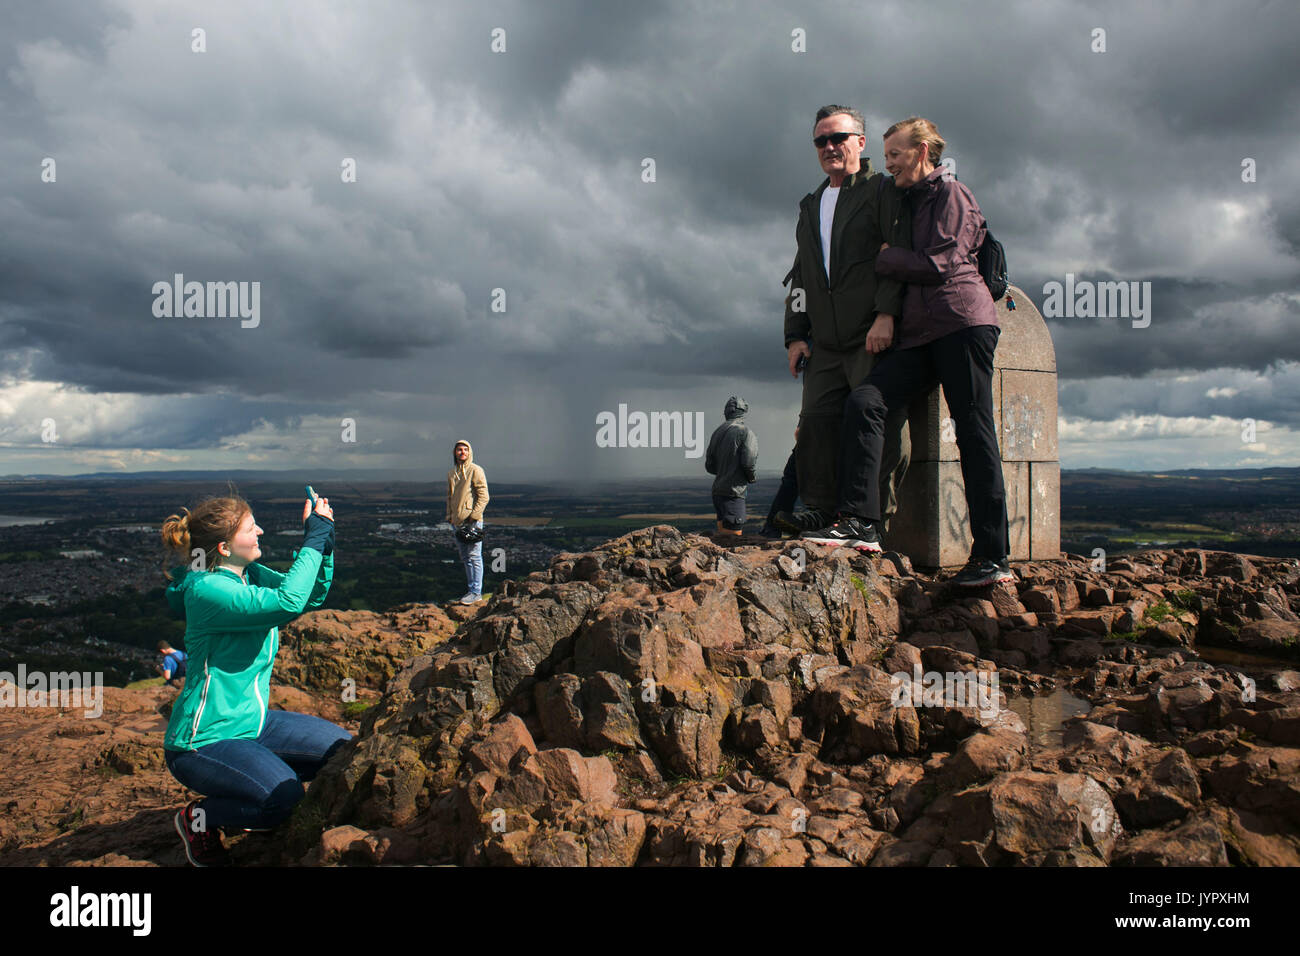 A couple have their phot taken on top of thepeak. Rain is over Edinburgh and coming closer. The peak of King Arthur's Seat is a popular destination fo Stock Photo